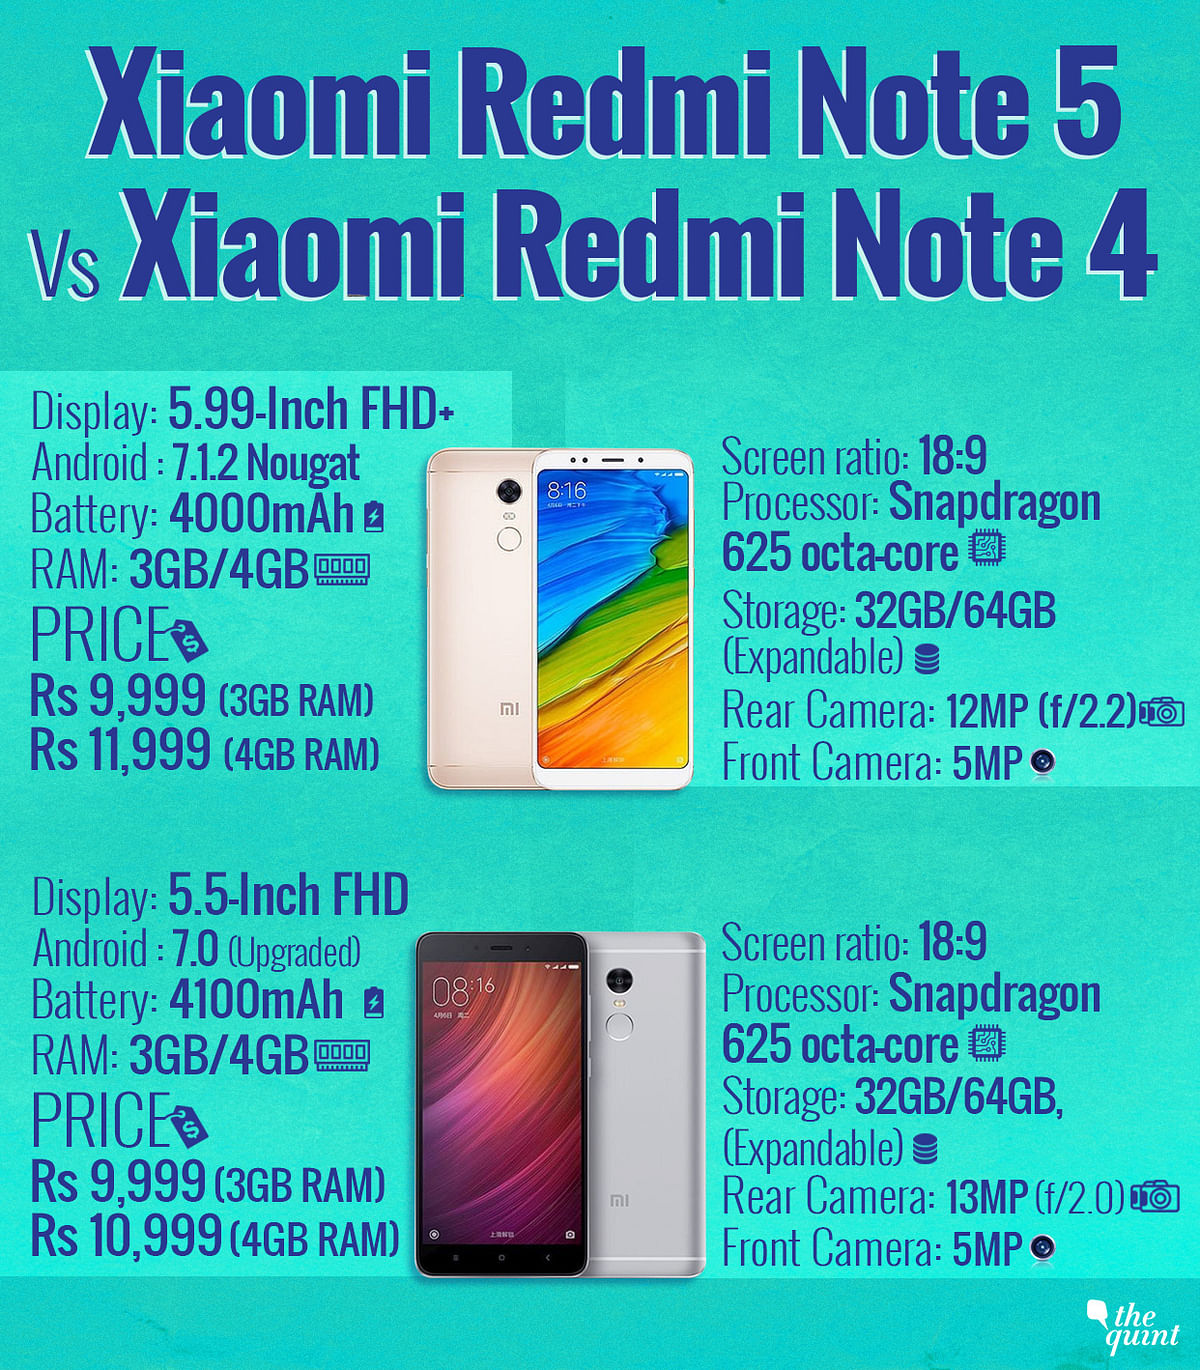 Here’s a comparison between the Redmi Note 5 and Redmi Note 4. What has changed and what hasn’t? Find out.